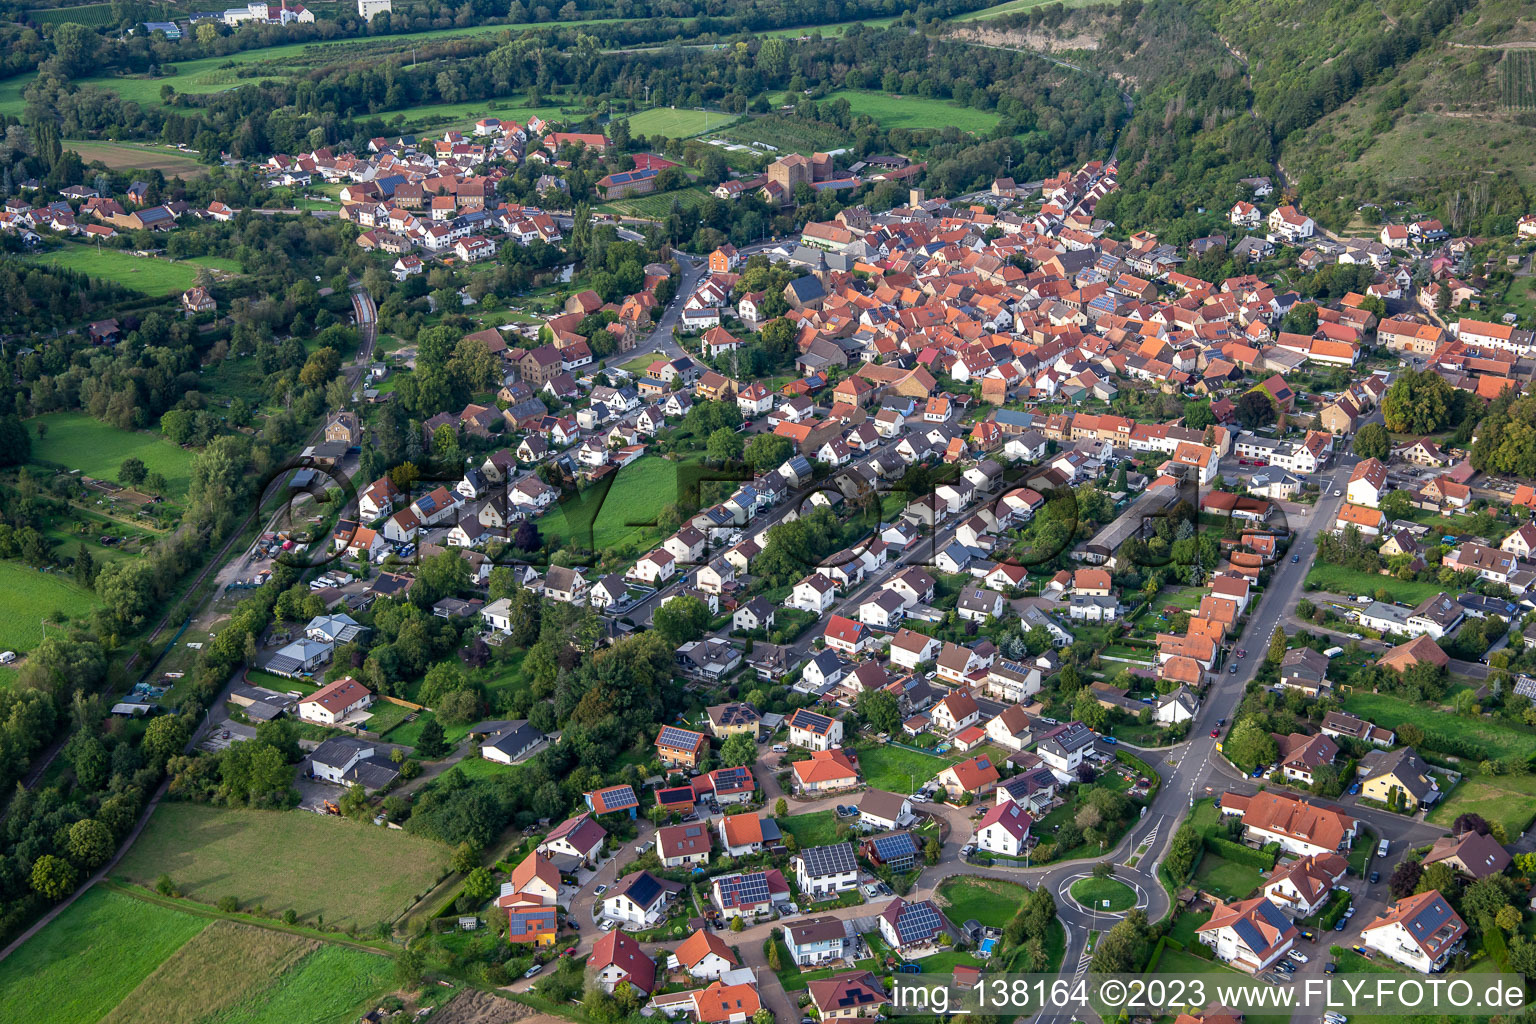 Drone image of Odernheim am Glan in the state Rhineland-Palatinate, Germany